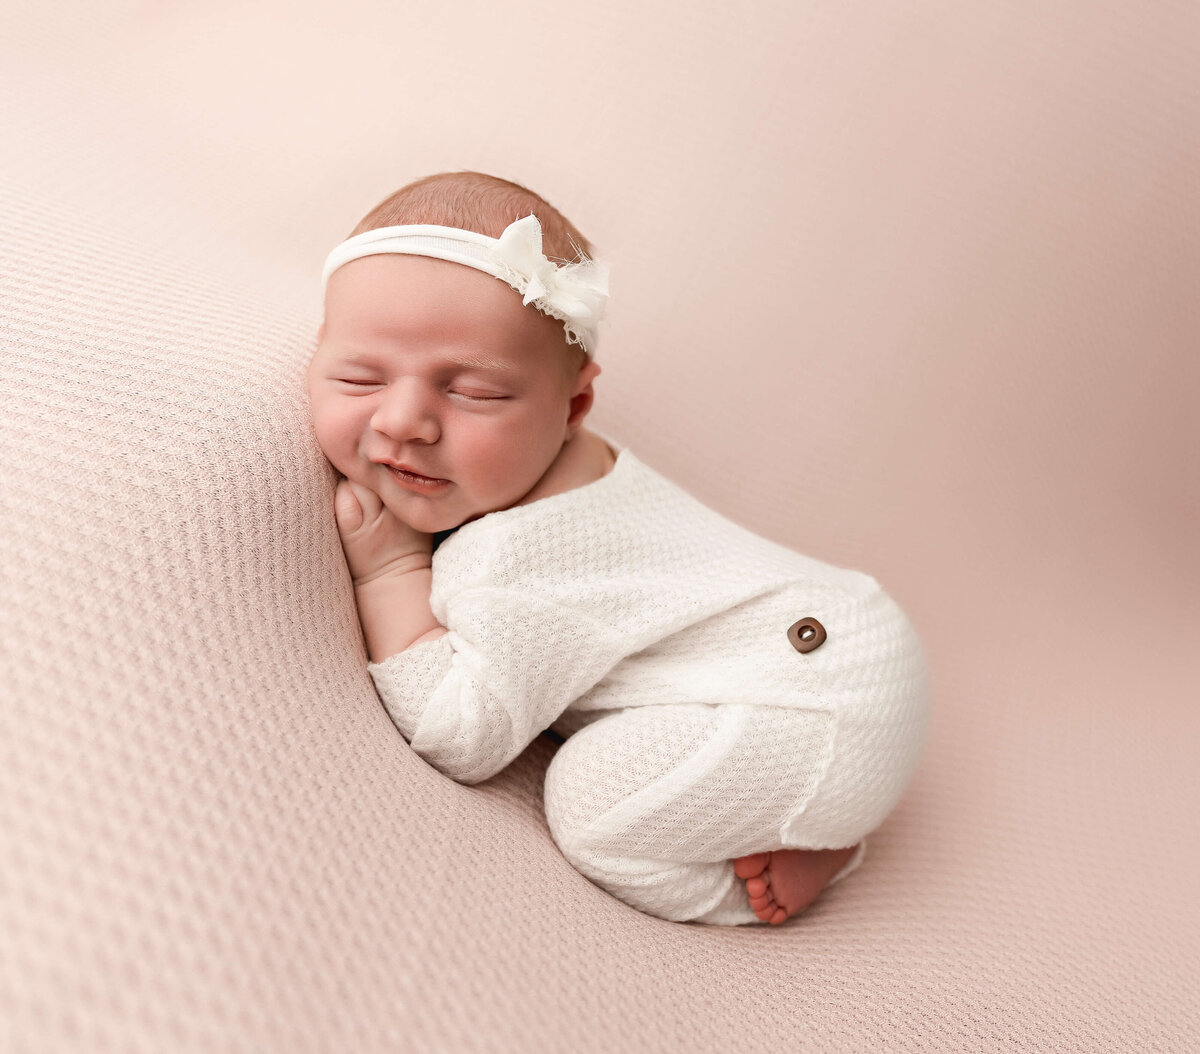 Erie Pa newborn photography studio portrait of a baby girl in a white sleeper in bum up pose